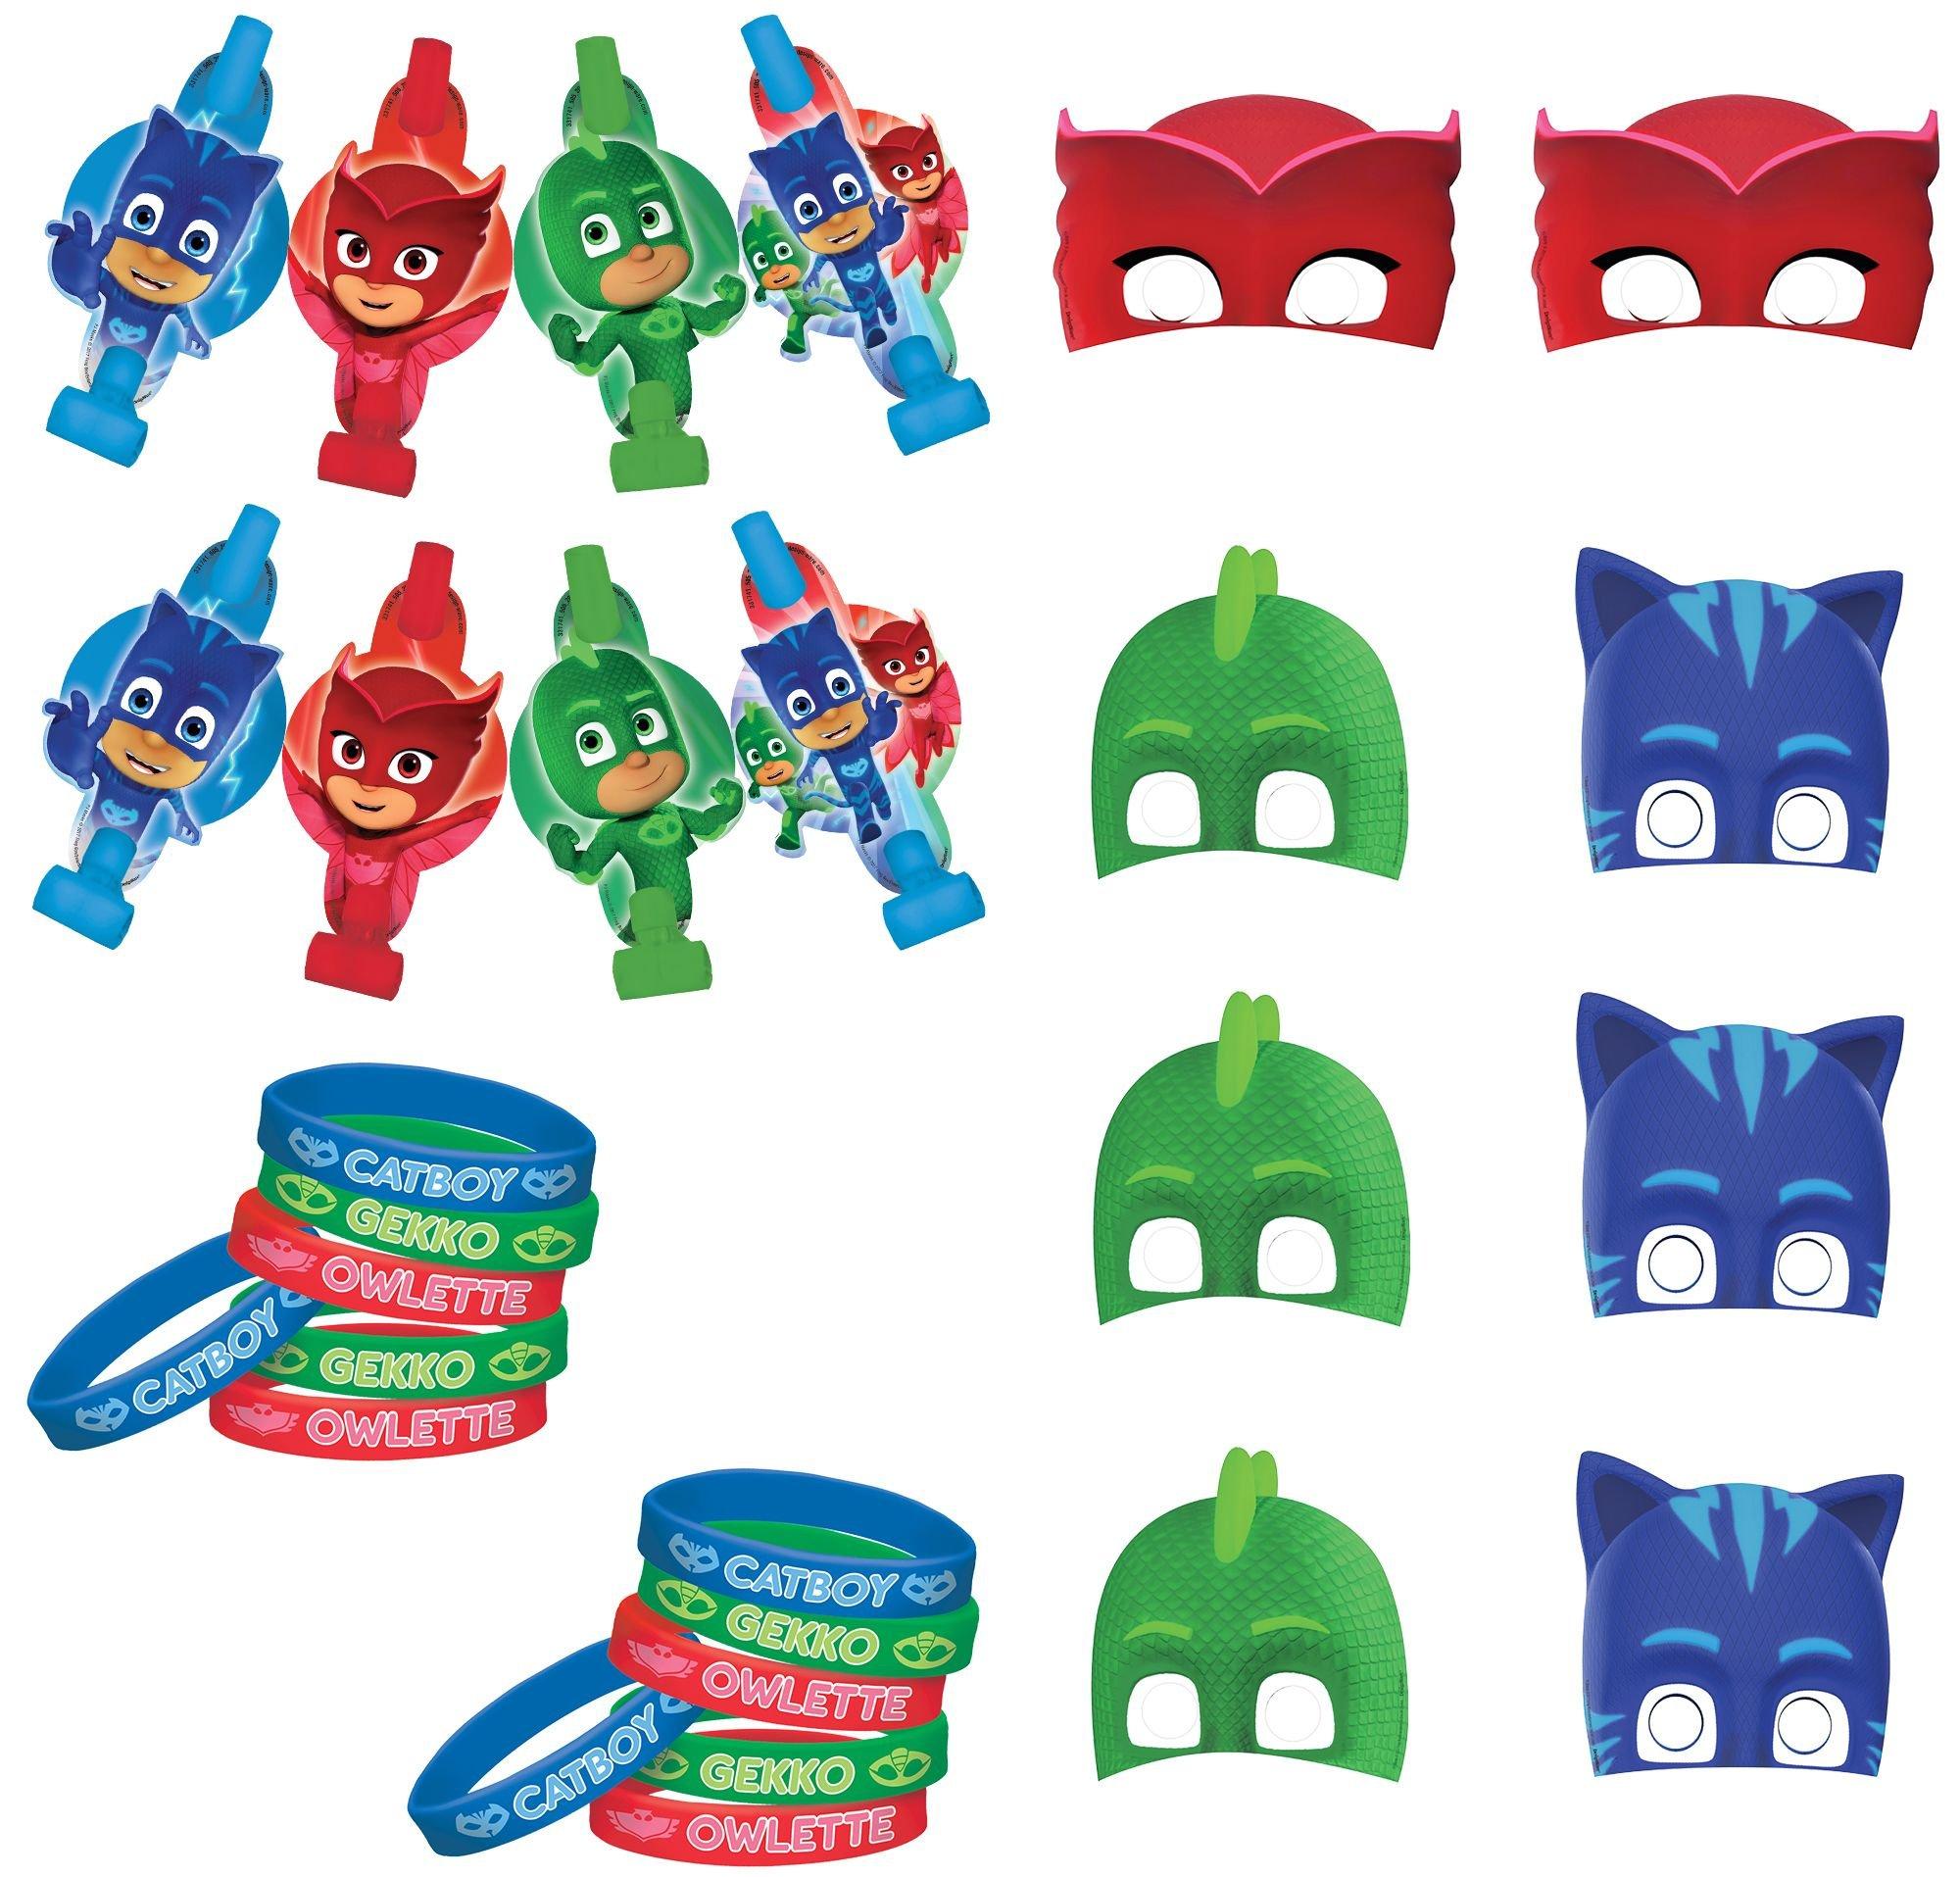 PJ Masks Party Favor Supplies Pack for 8 Guests - Kit Includes Blowouts, Masks & Wristbands